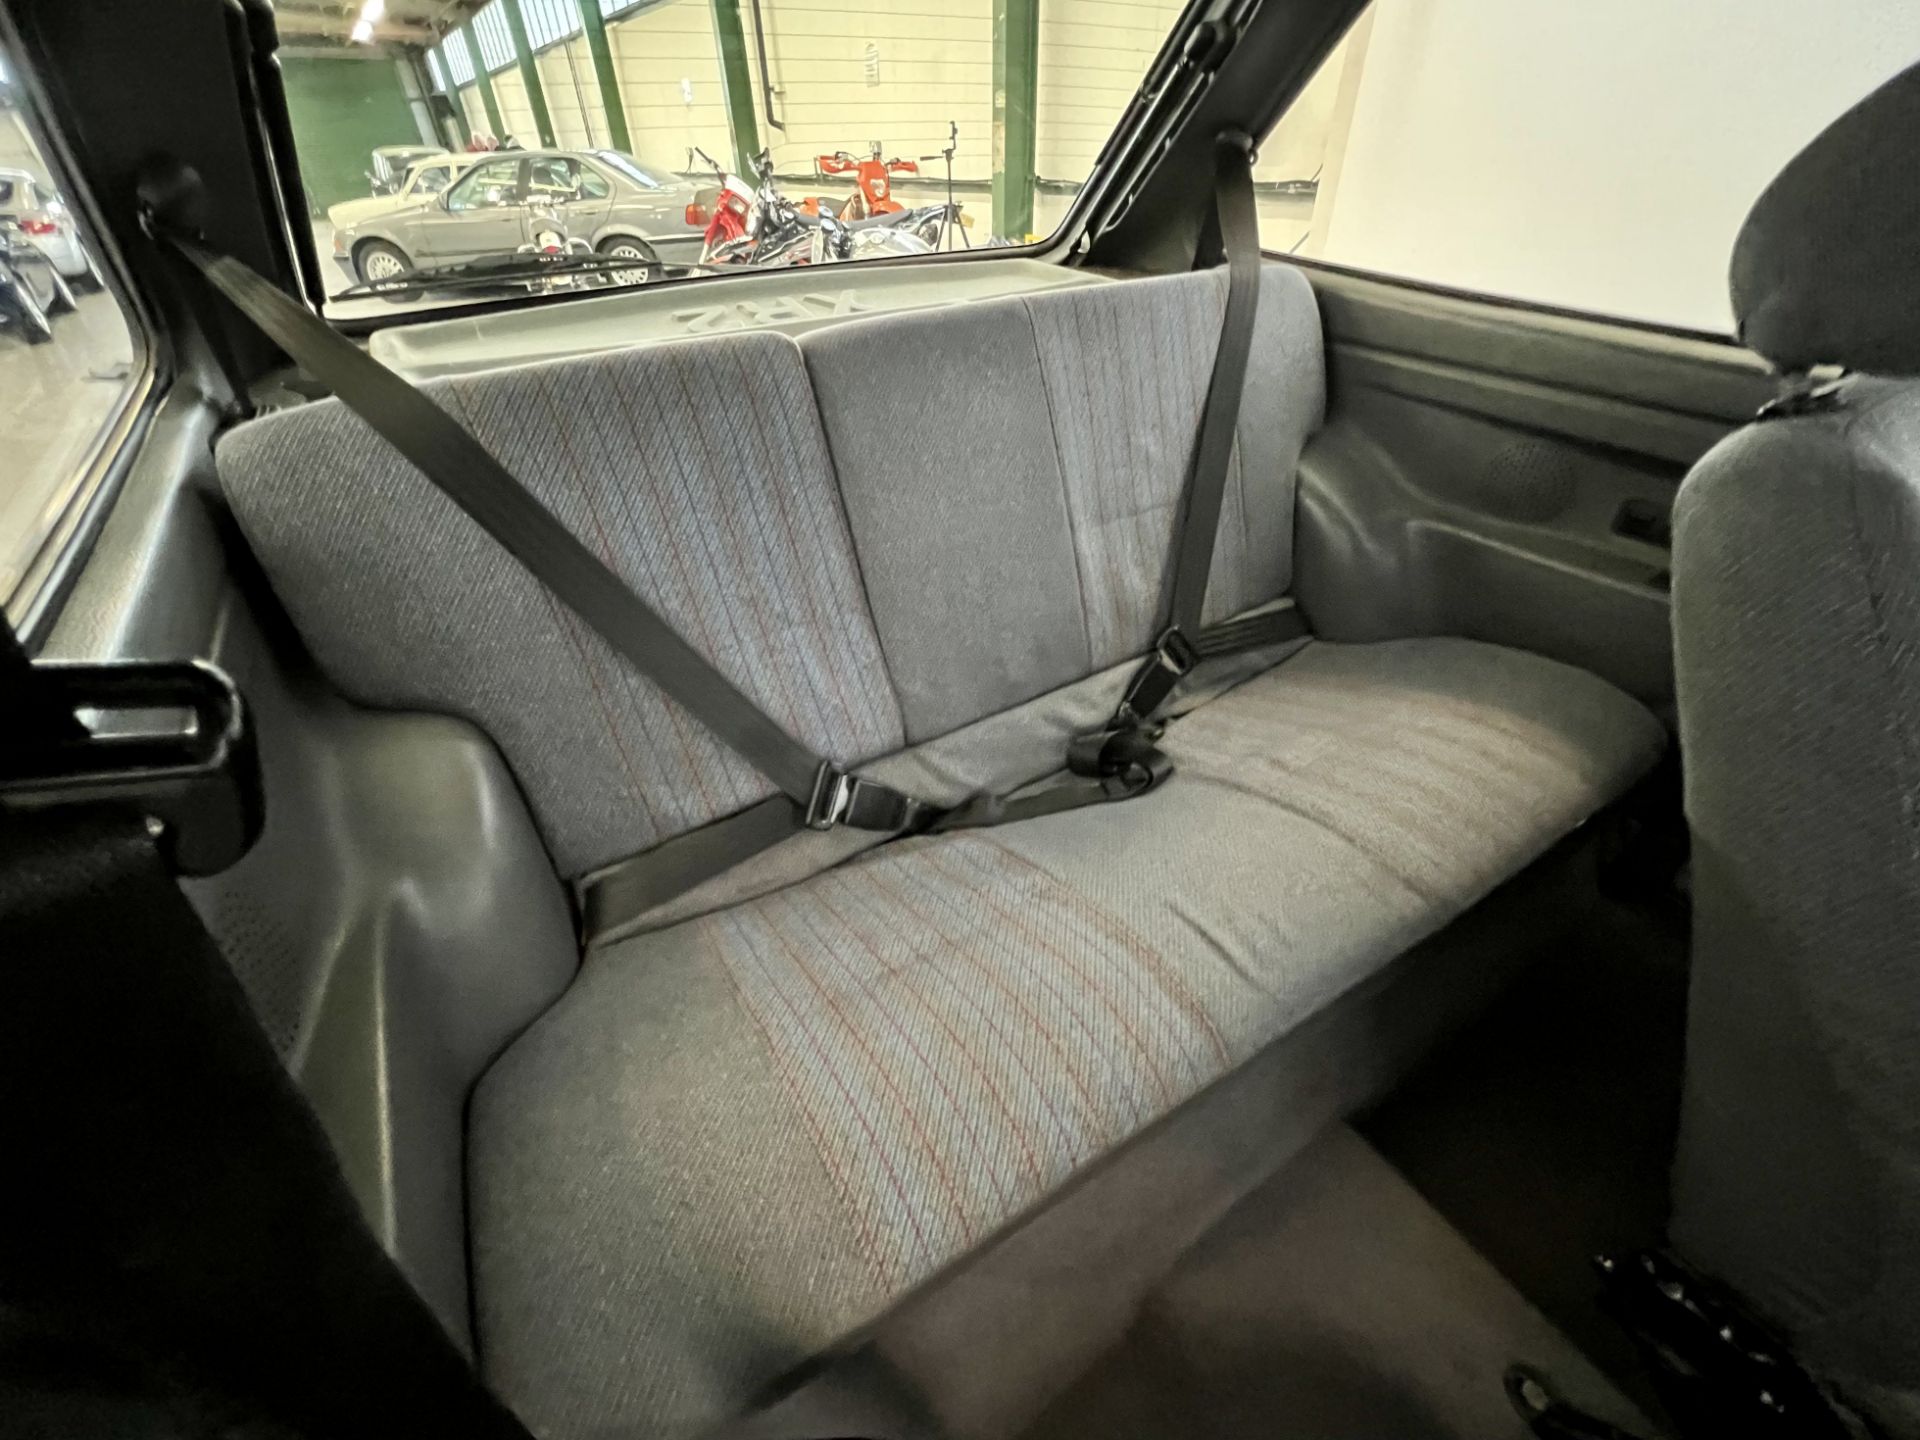 Ford Fiesta XR2 - Image 21 of 37